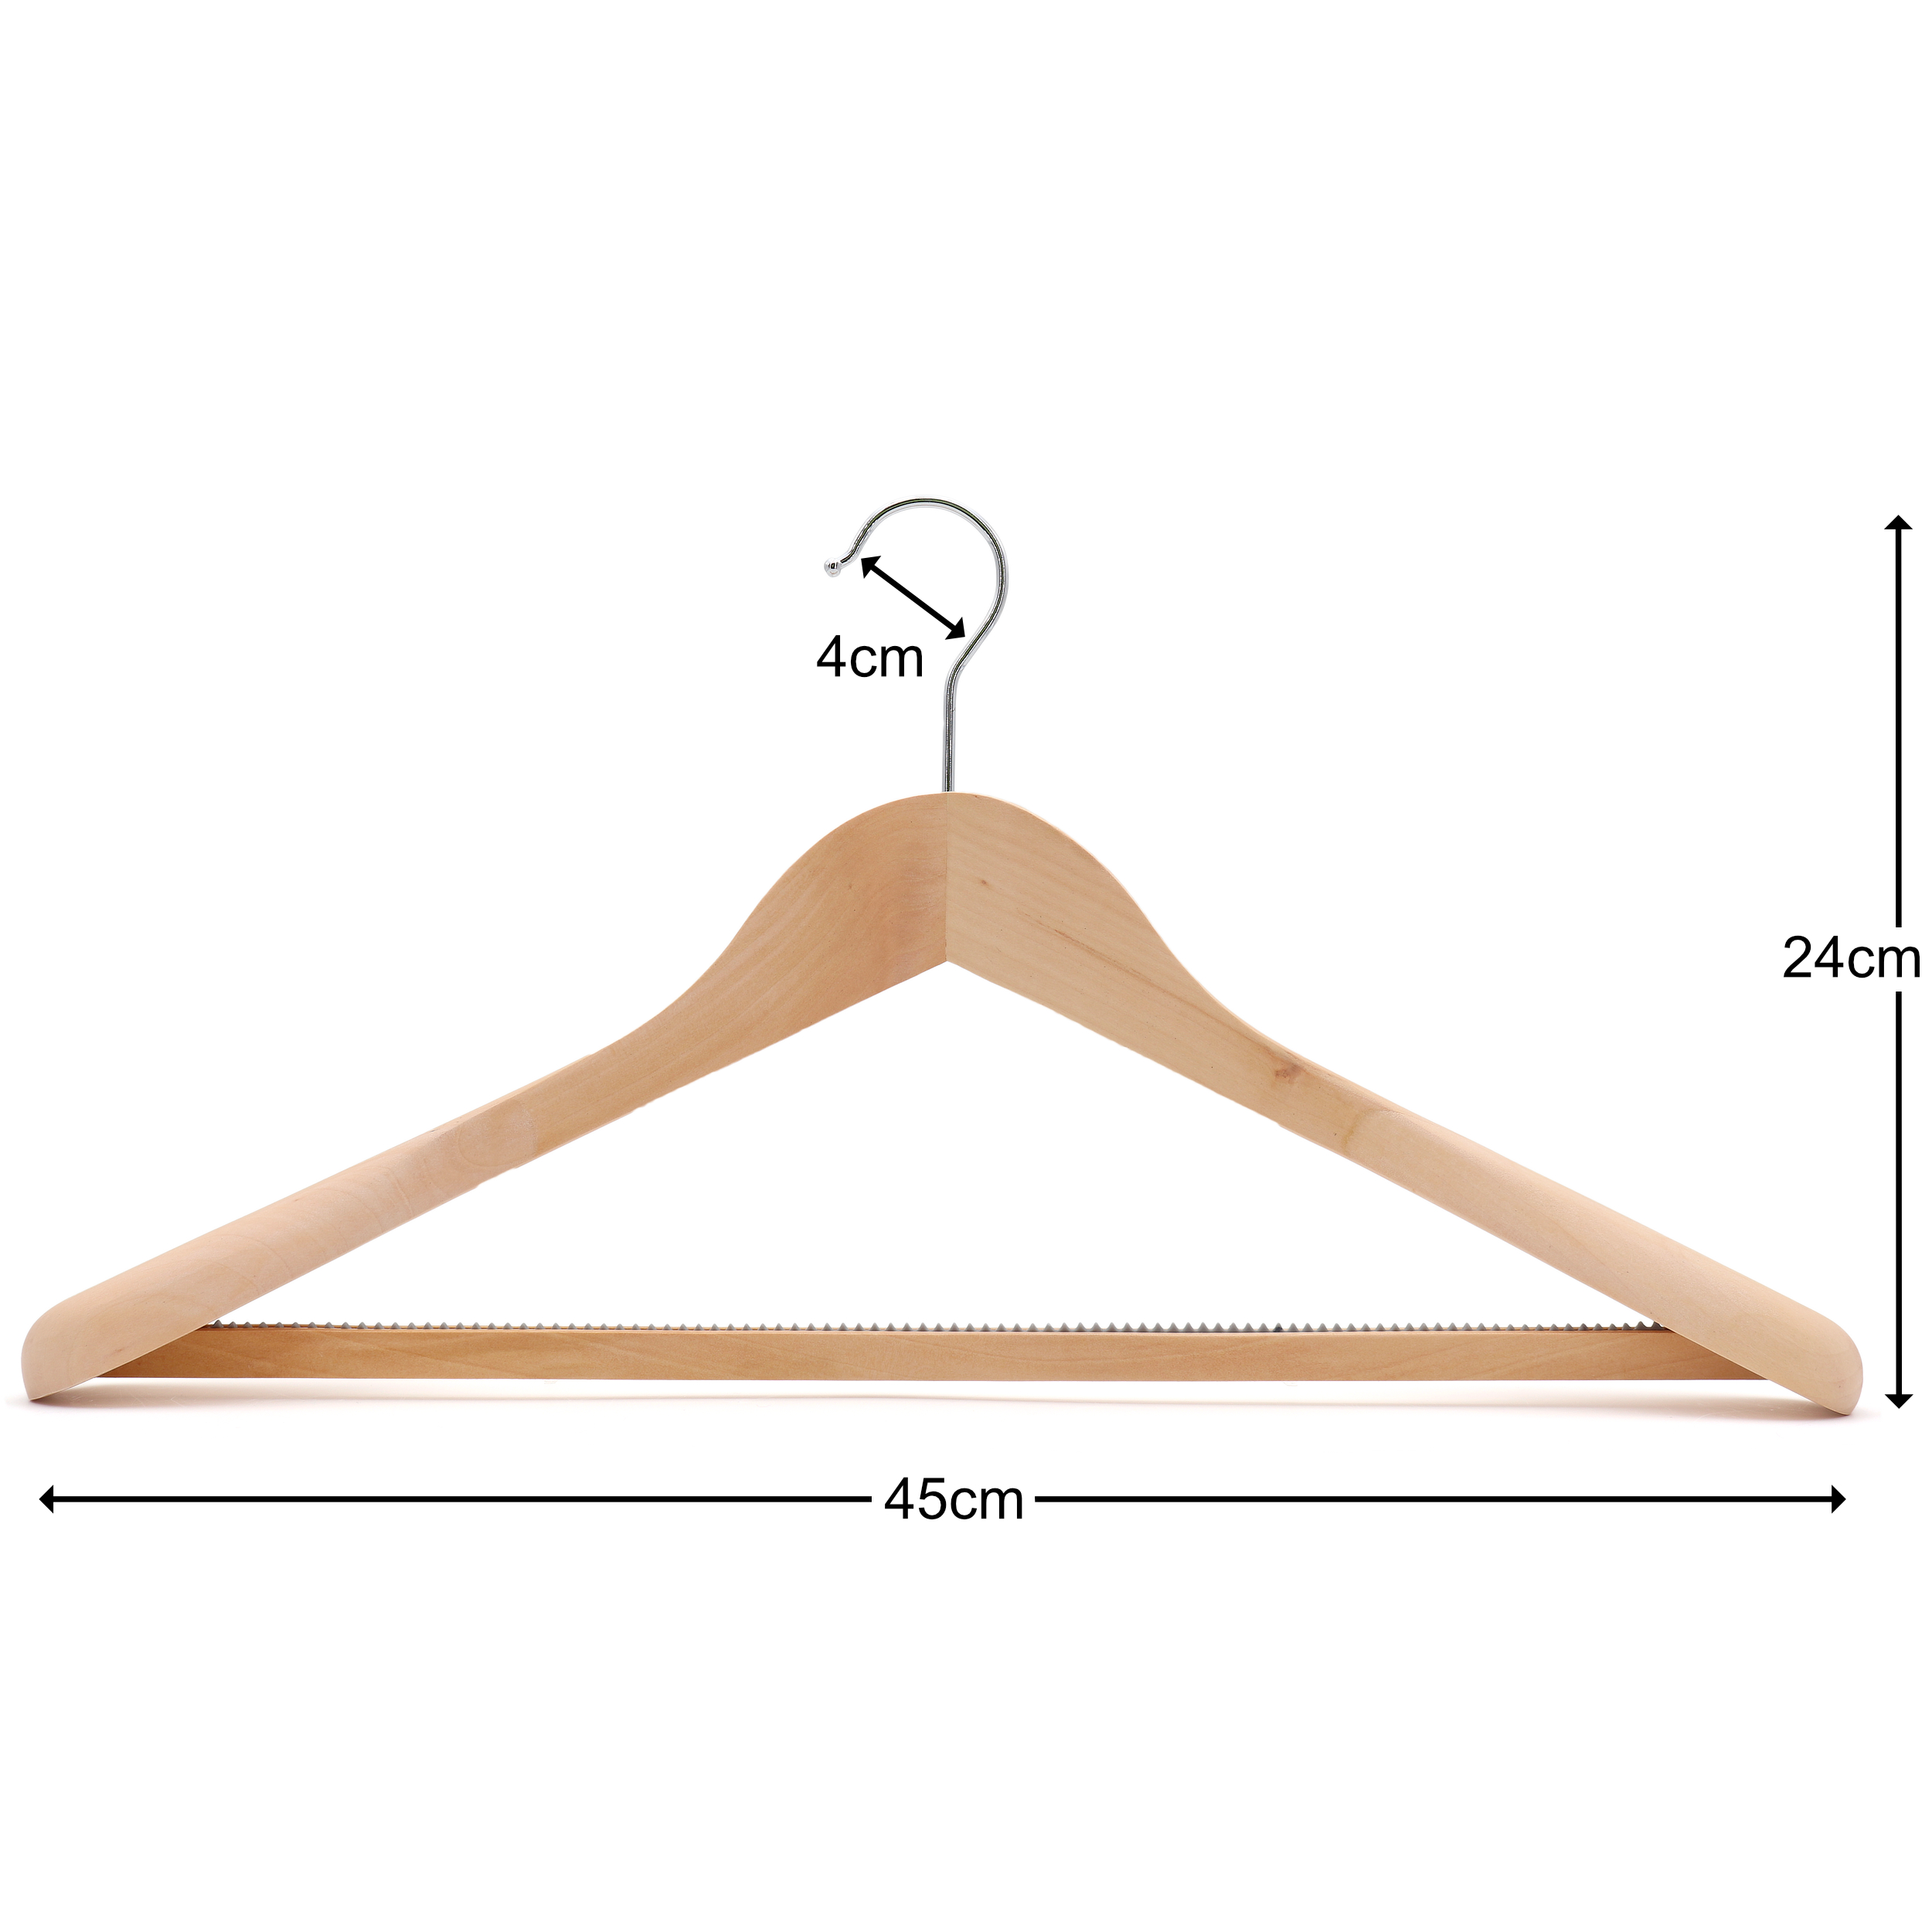 shirt coat clothes hangers The Hanger Store 2 Wooden suit hangers with broad ends and non slip trouser bar for jacket 